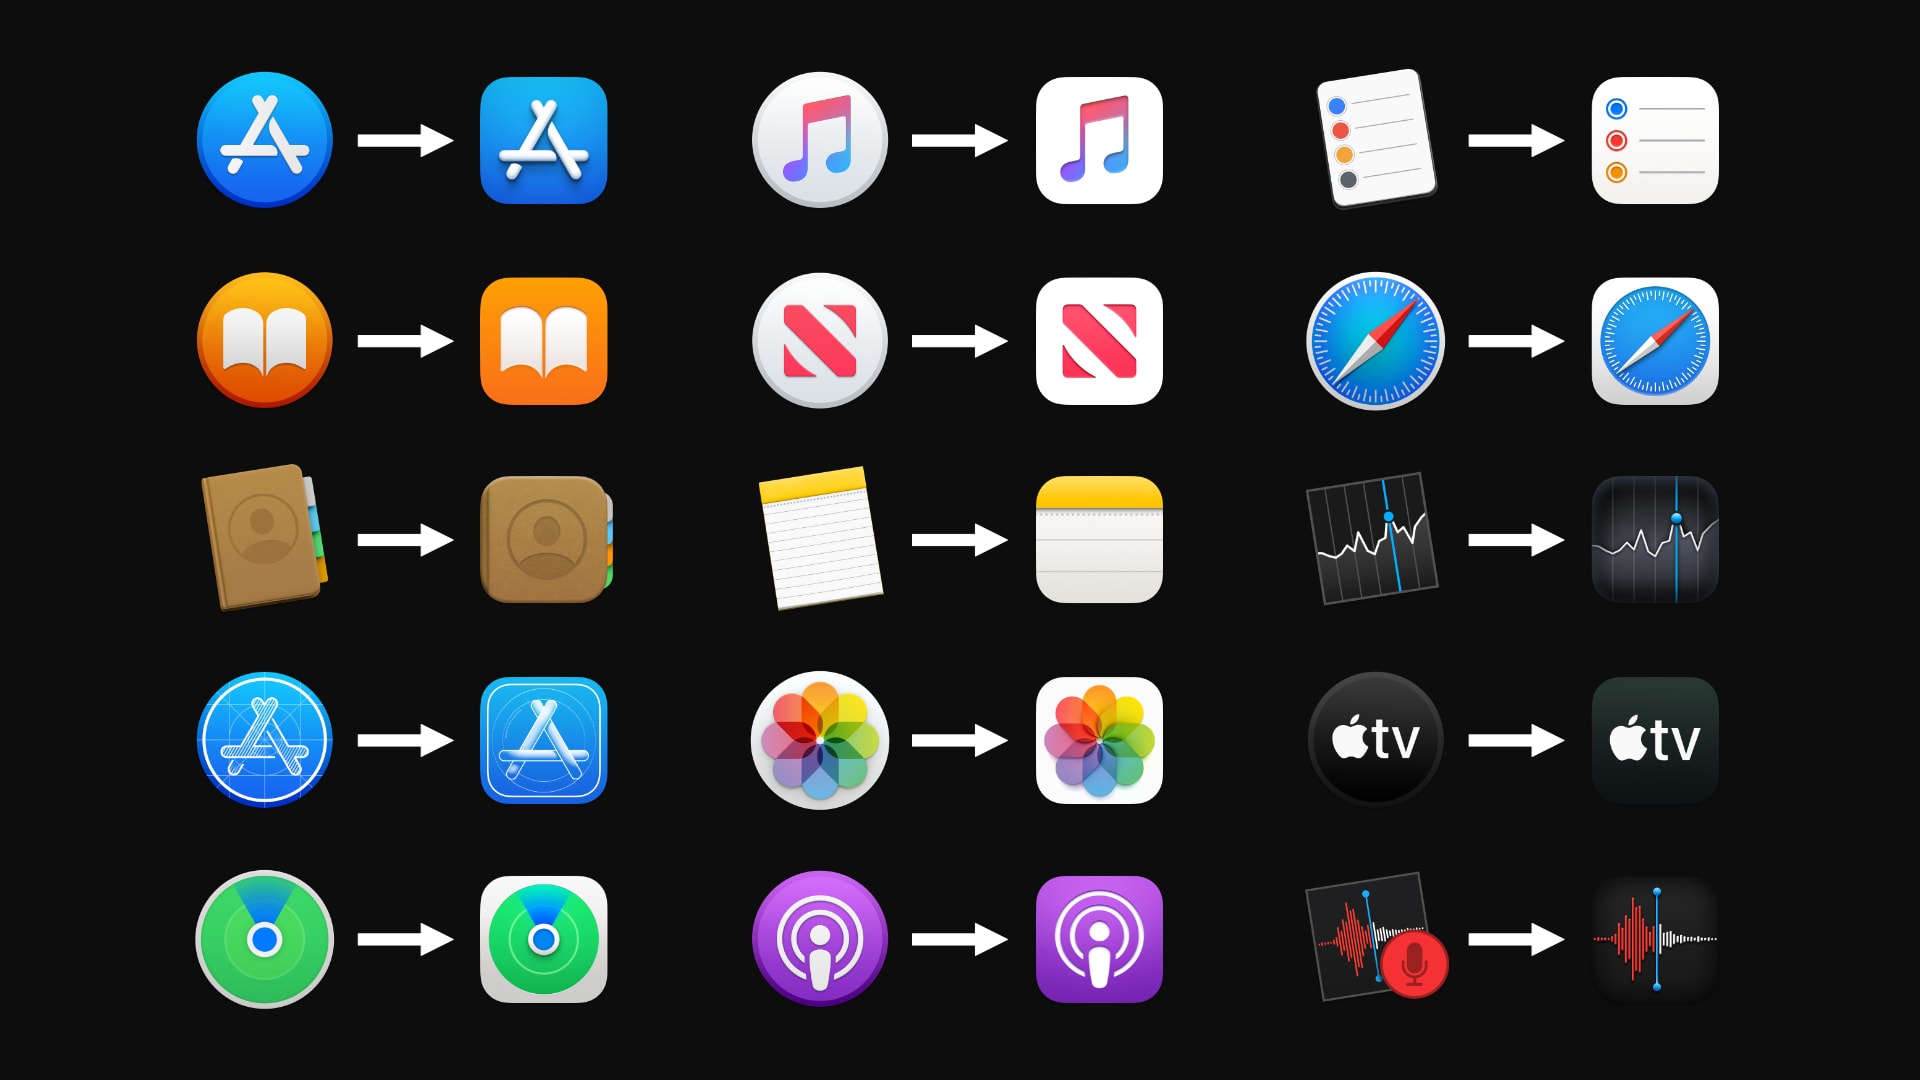 Big Sur vs. Catalina: App icons. So much has changed. So much is the same.